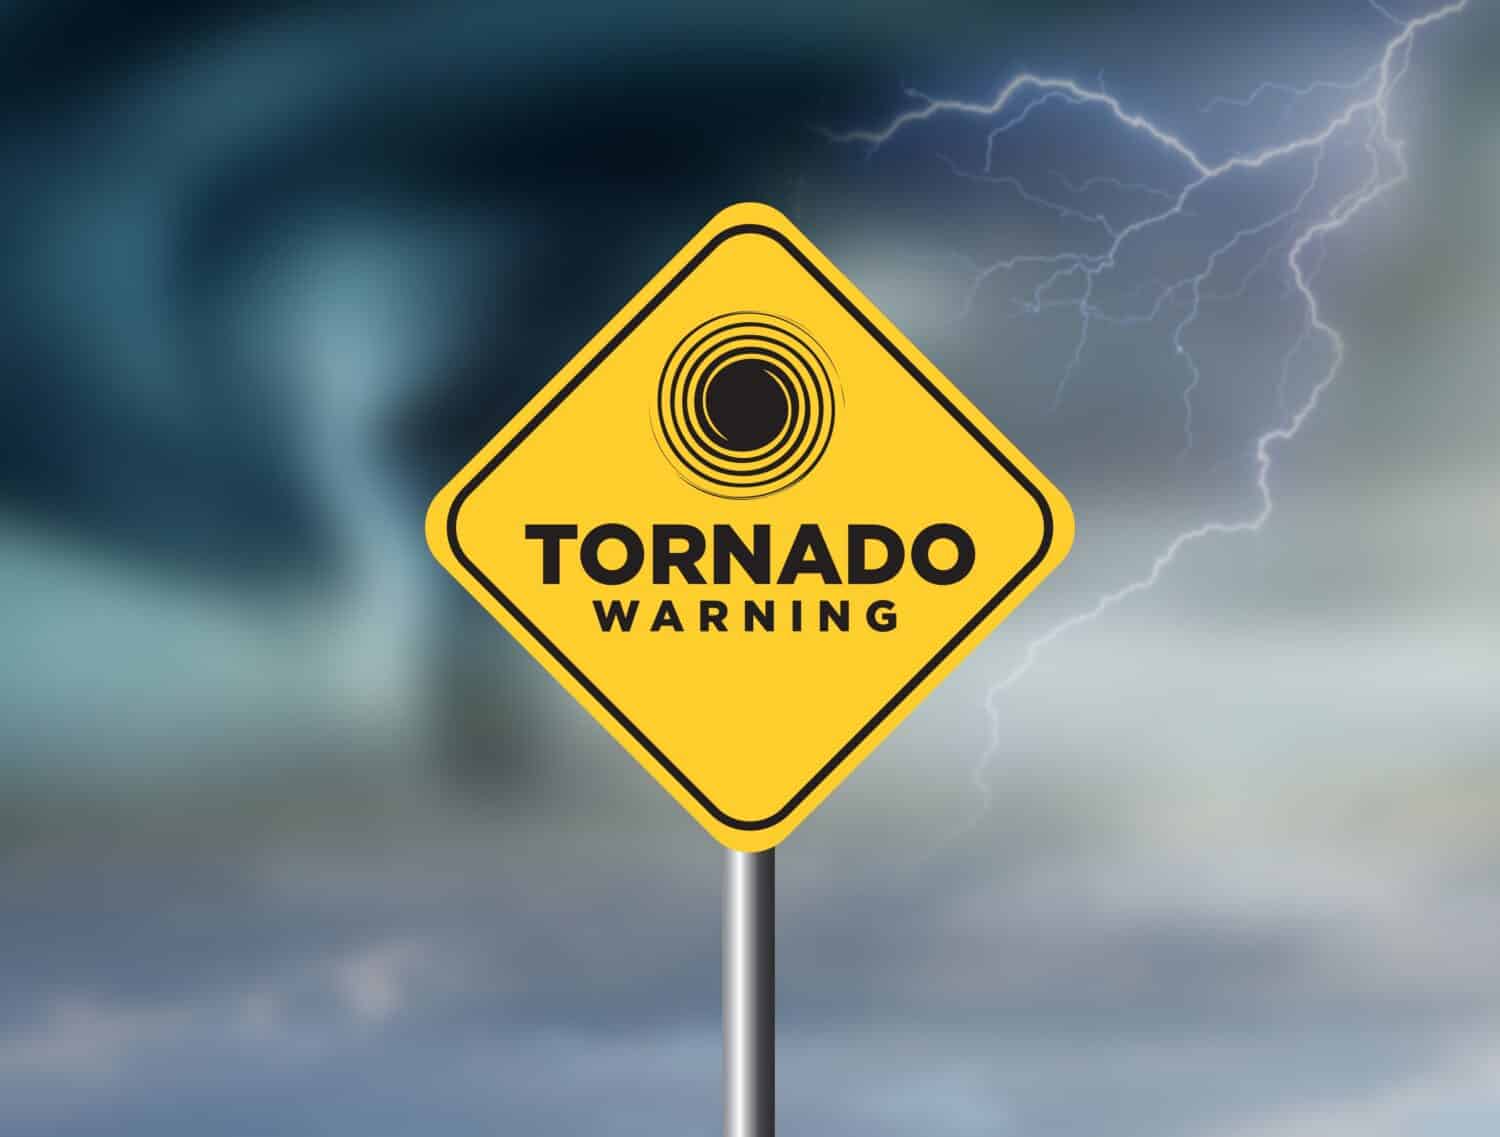 Tornado warning sign against a powerful stormy background with copy space. Dirty and angled sign with cyclonic winds add to the drama.